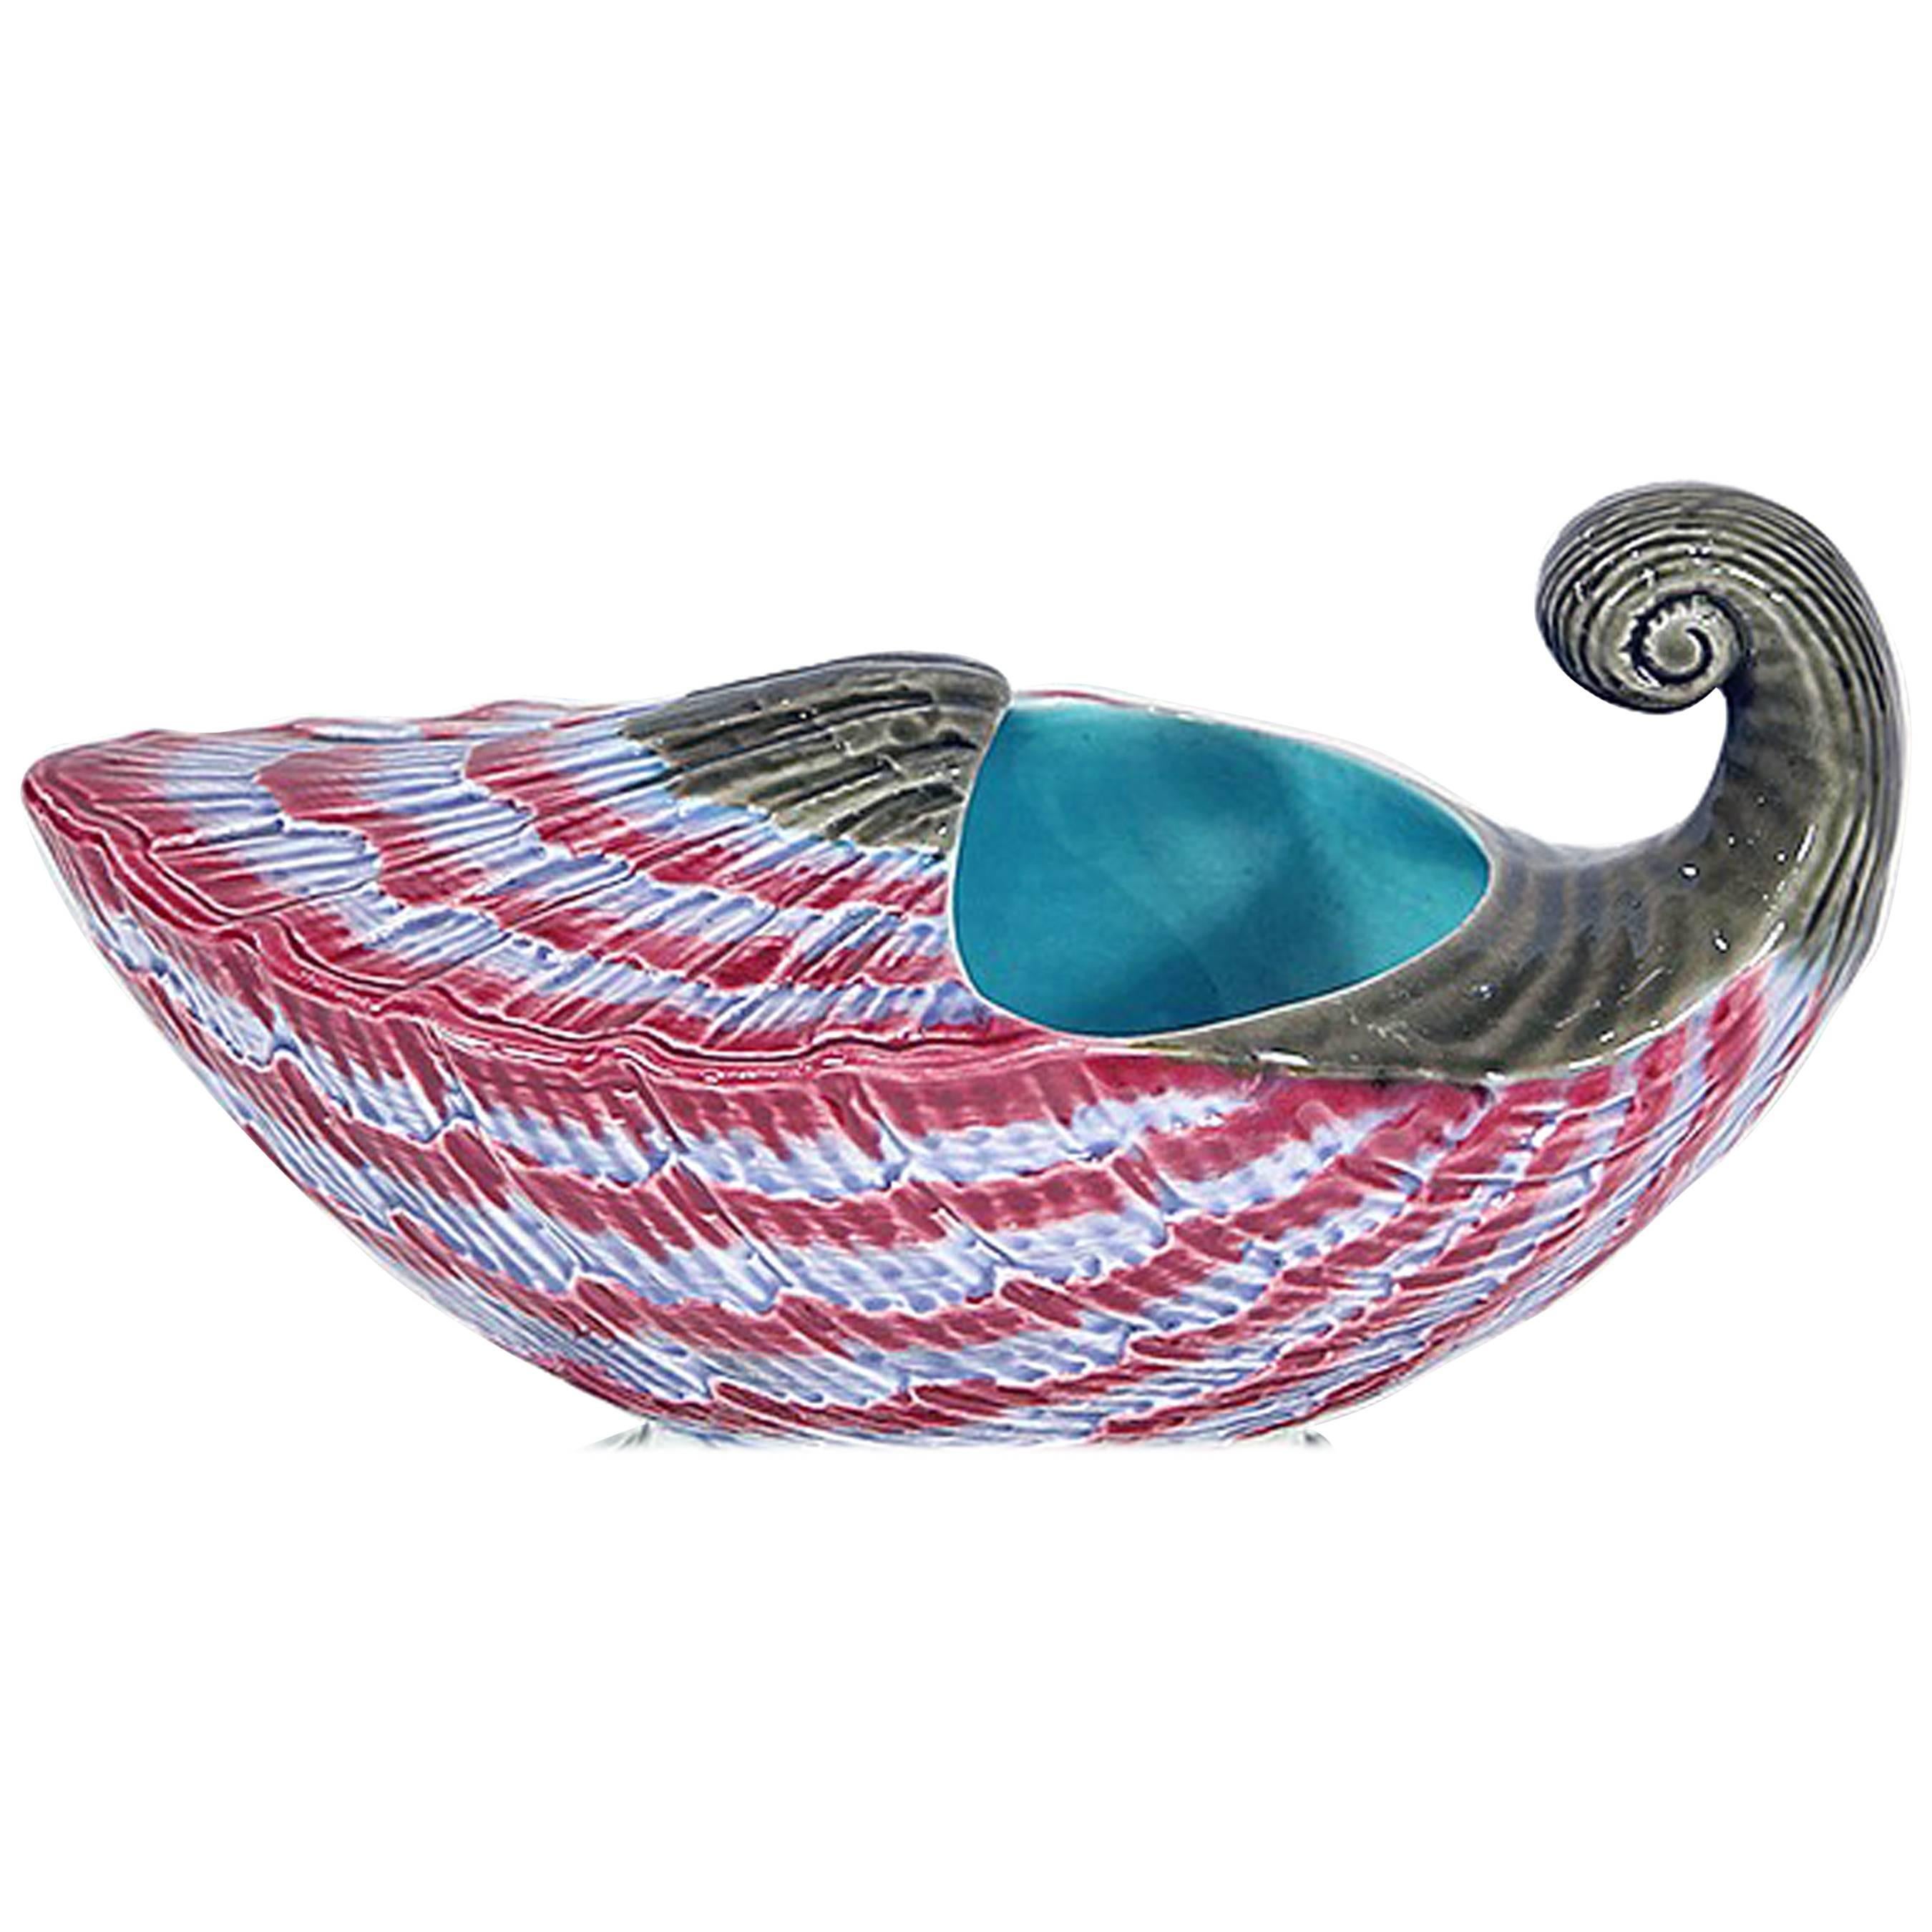 Wedgwood Majolica shell-form spoon warmer,
circa 1872.

The warmer is naturalistically modeled as a large shell in sky blue and amaranth.

Marks: Script in red M2954 and M below also impressed Wedgwood /WOH and (star) to left and S to right.